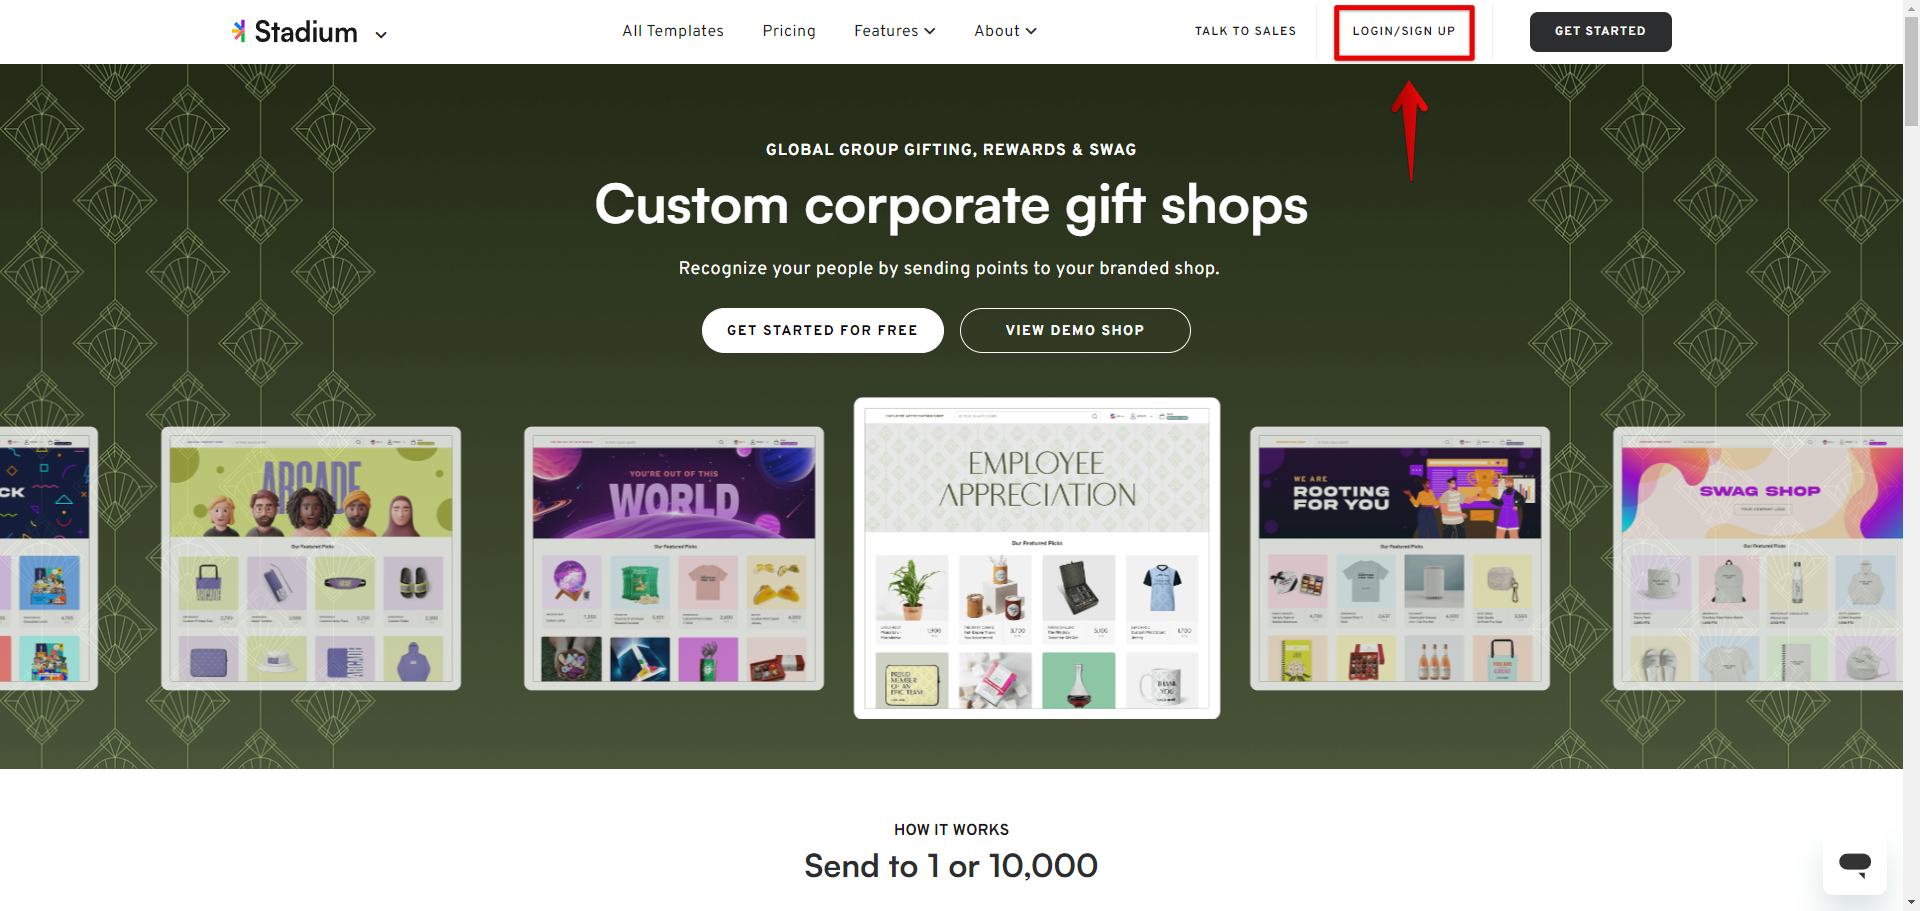 Stadium Shops – Global Group Gifting, Rewards and Swag 2024-01-26 05-20-09.png